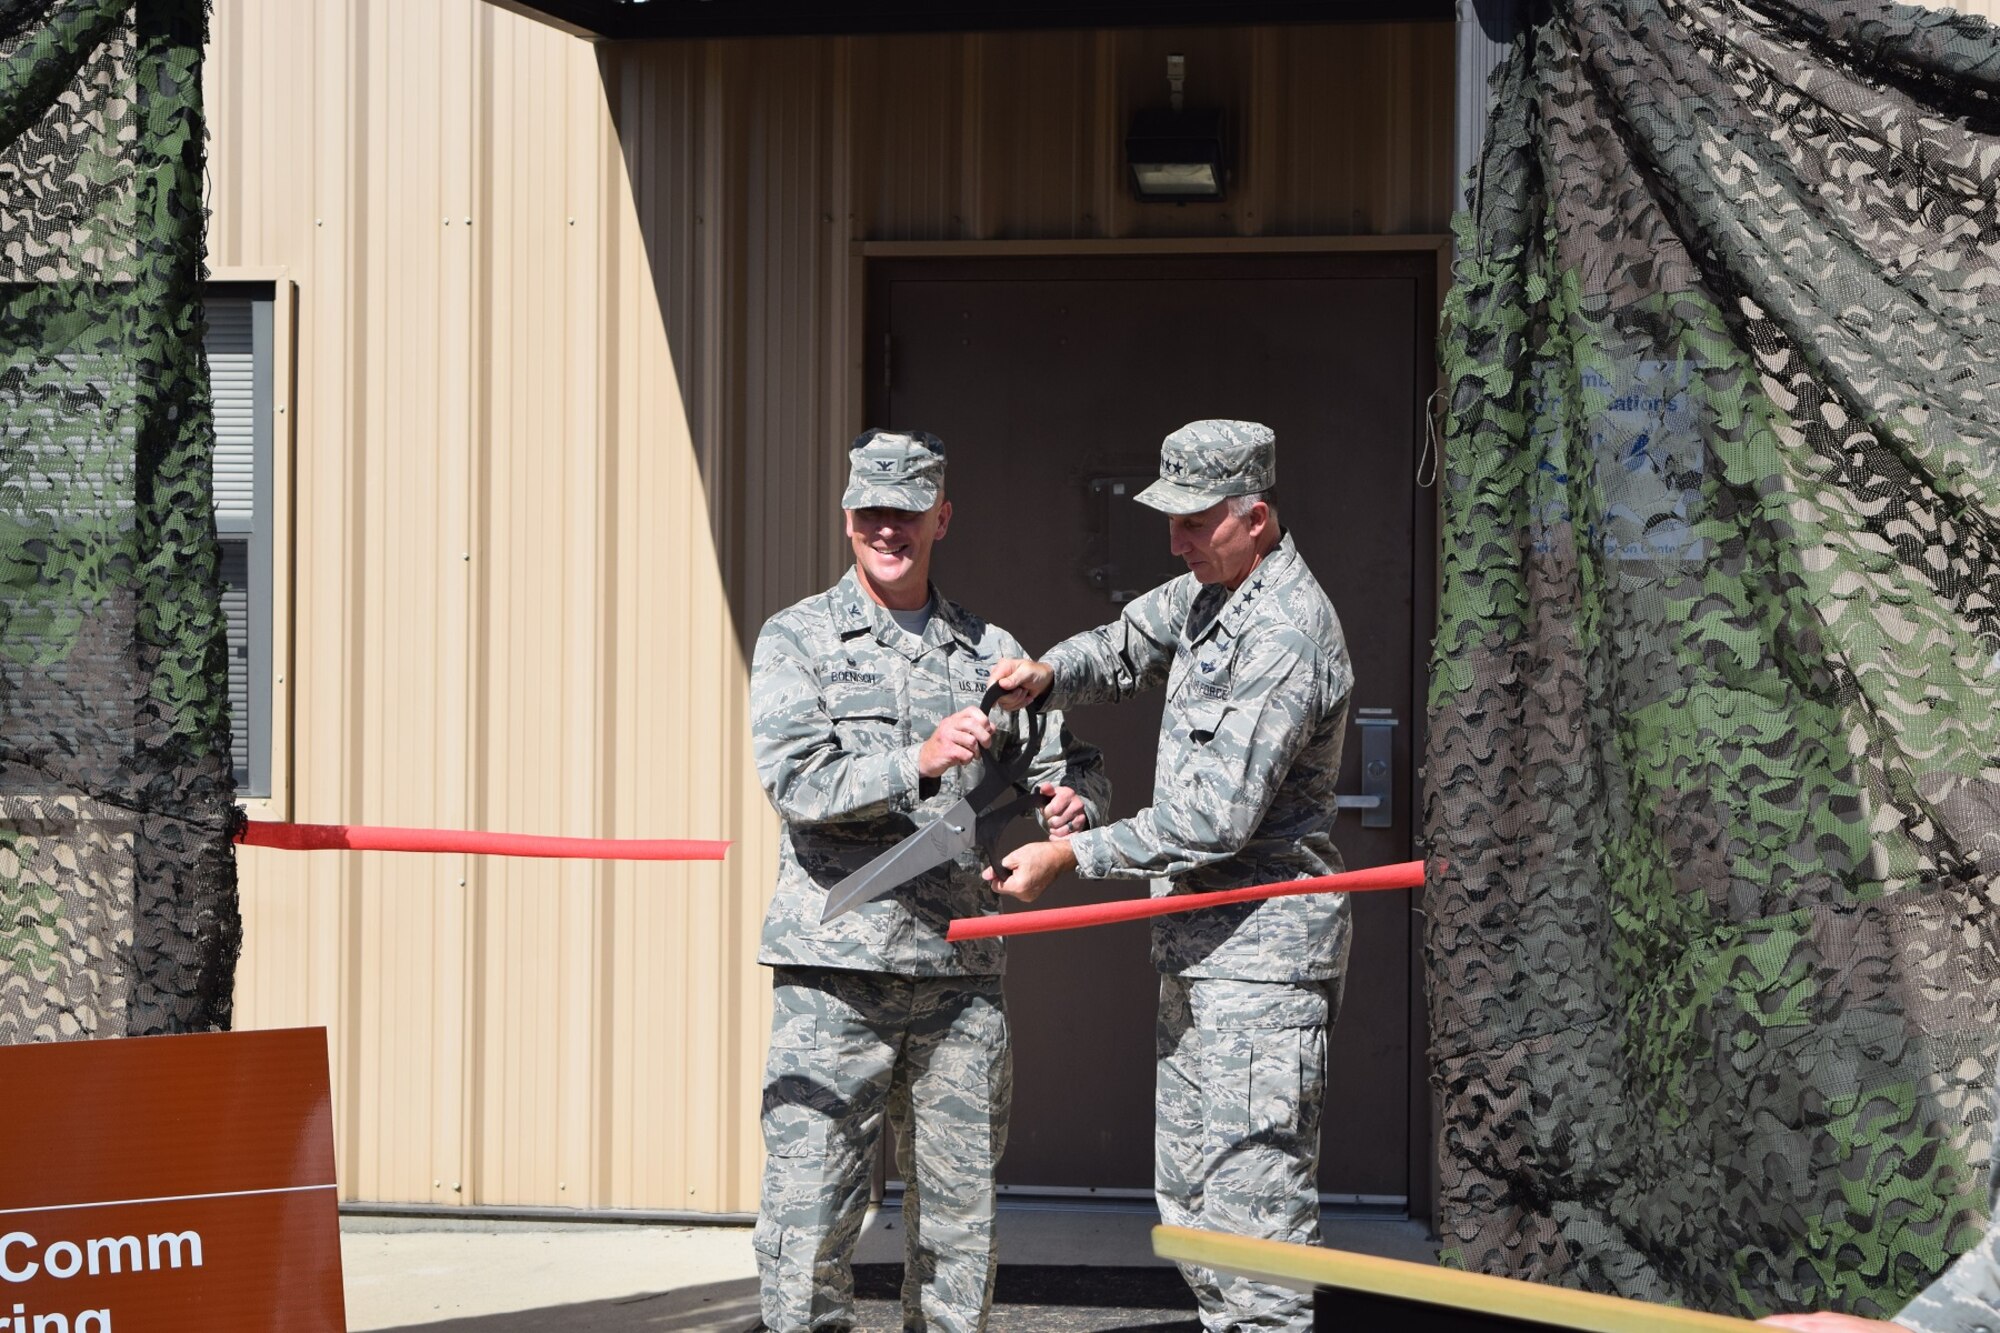 Colonel Jeremy Boenisch, 5th Combat Communications Group commander, along with Lieutenant General William J. Bender, Chief Information Officer, Office of the Secretary of the Air Force, cut the ribbon during the opening ceremony for the new Combat Communications Engineering Integration Center (EIC) located at Robins AFB, Ga. 19 Oct. 

Effective 25 Sep 2016, the EIC was established as a central engineering and validation element for the modernization of combat communications units throughout the total force.
